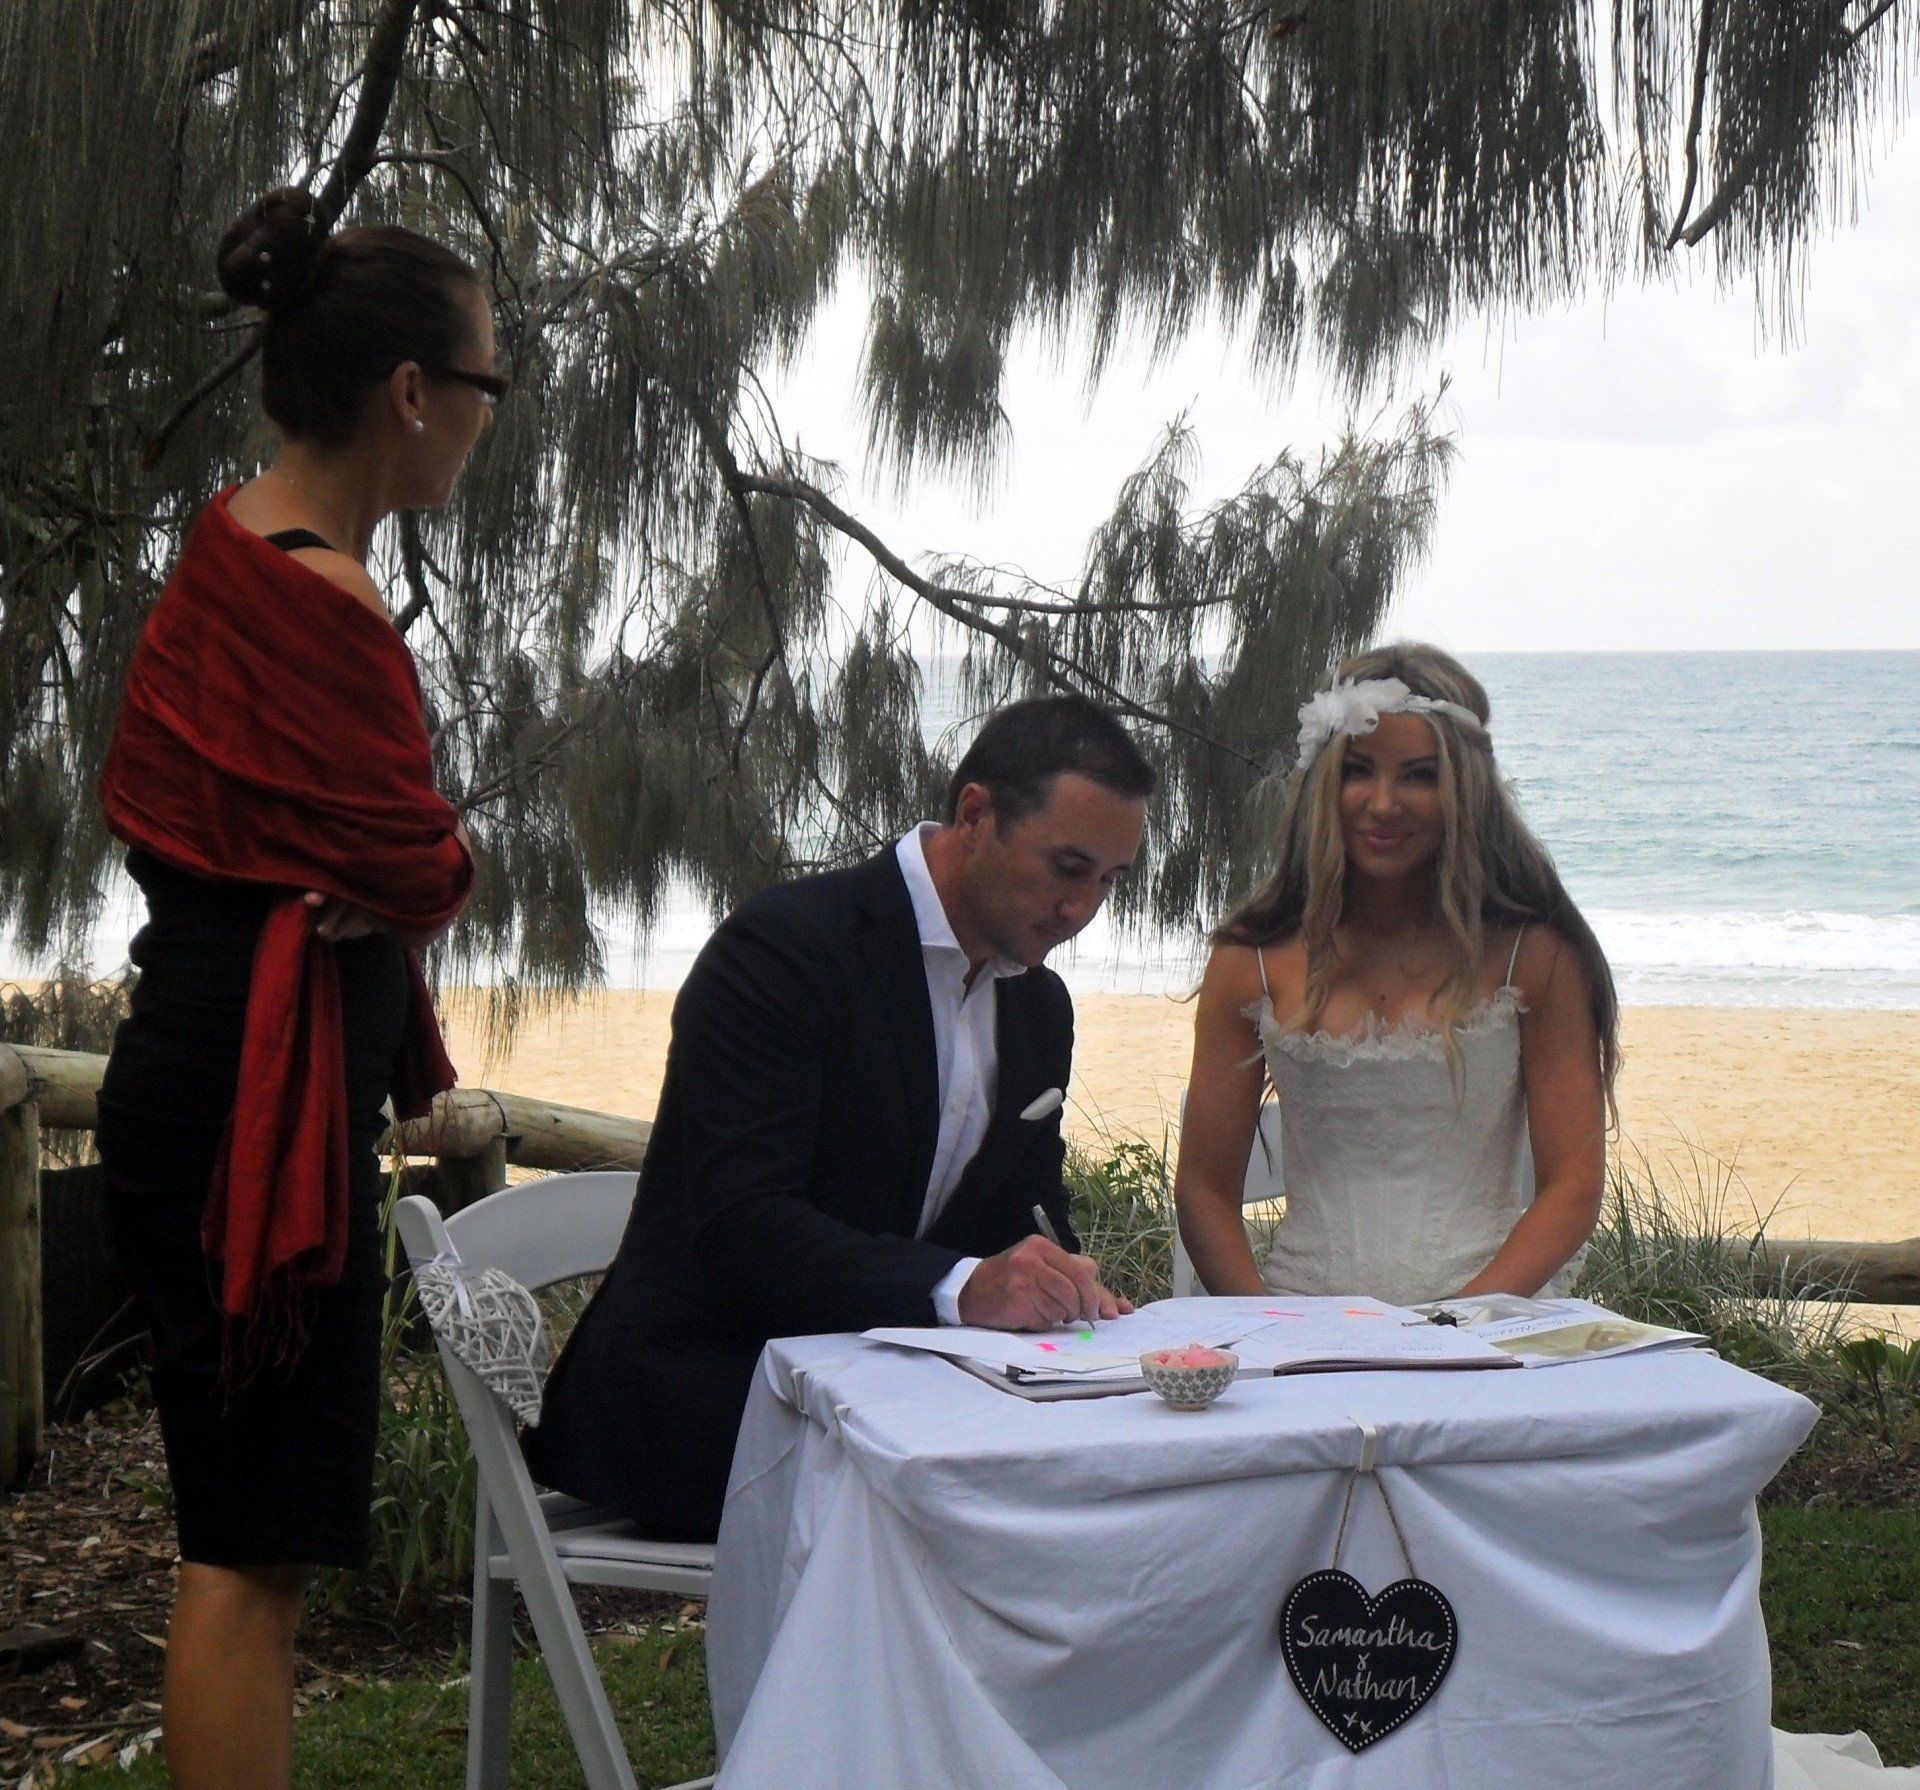 bride and groom sign papers at Noosa casuarina Grove at sunset, bride in white with tiara and groom in black suit